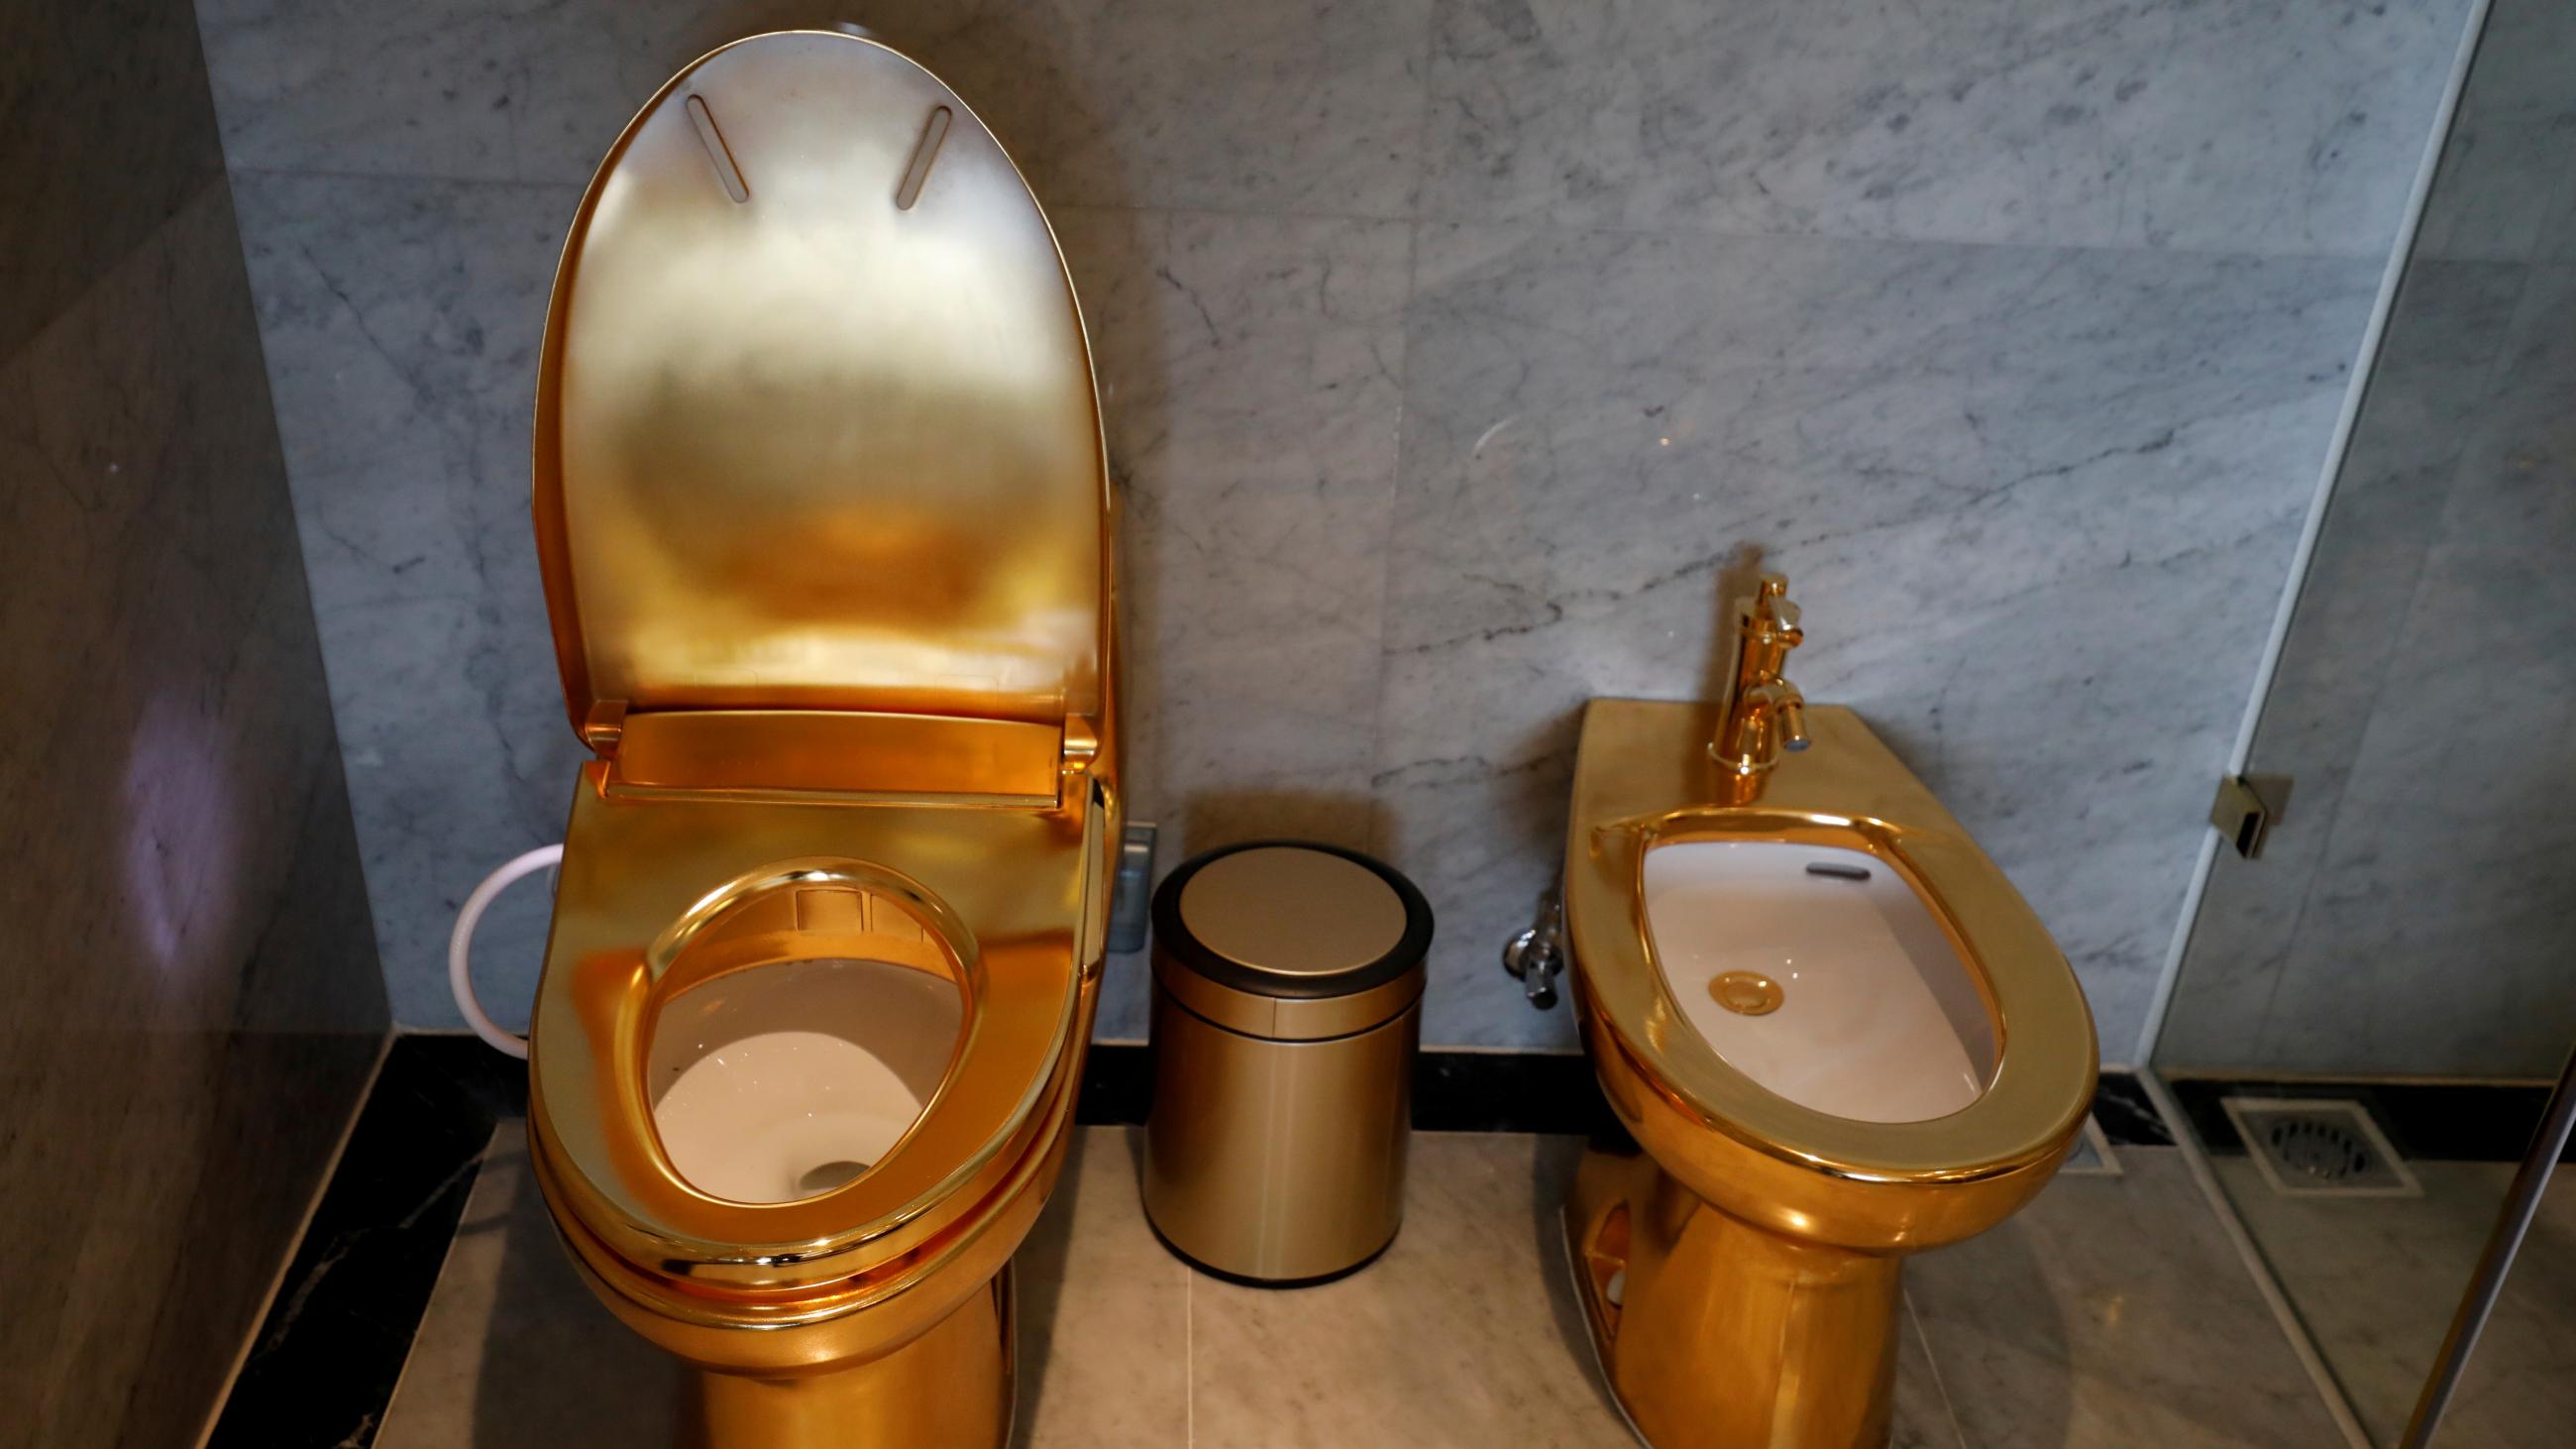  gold plated toilet and bidet 